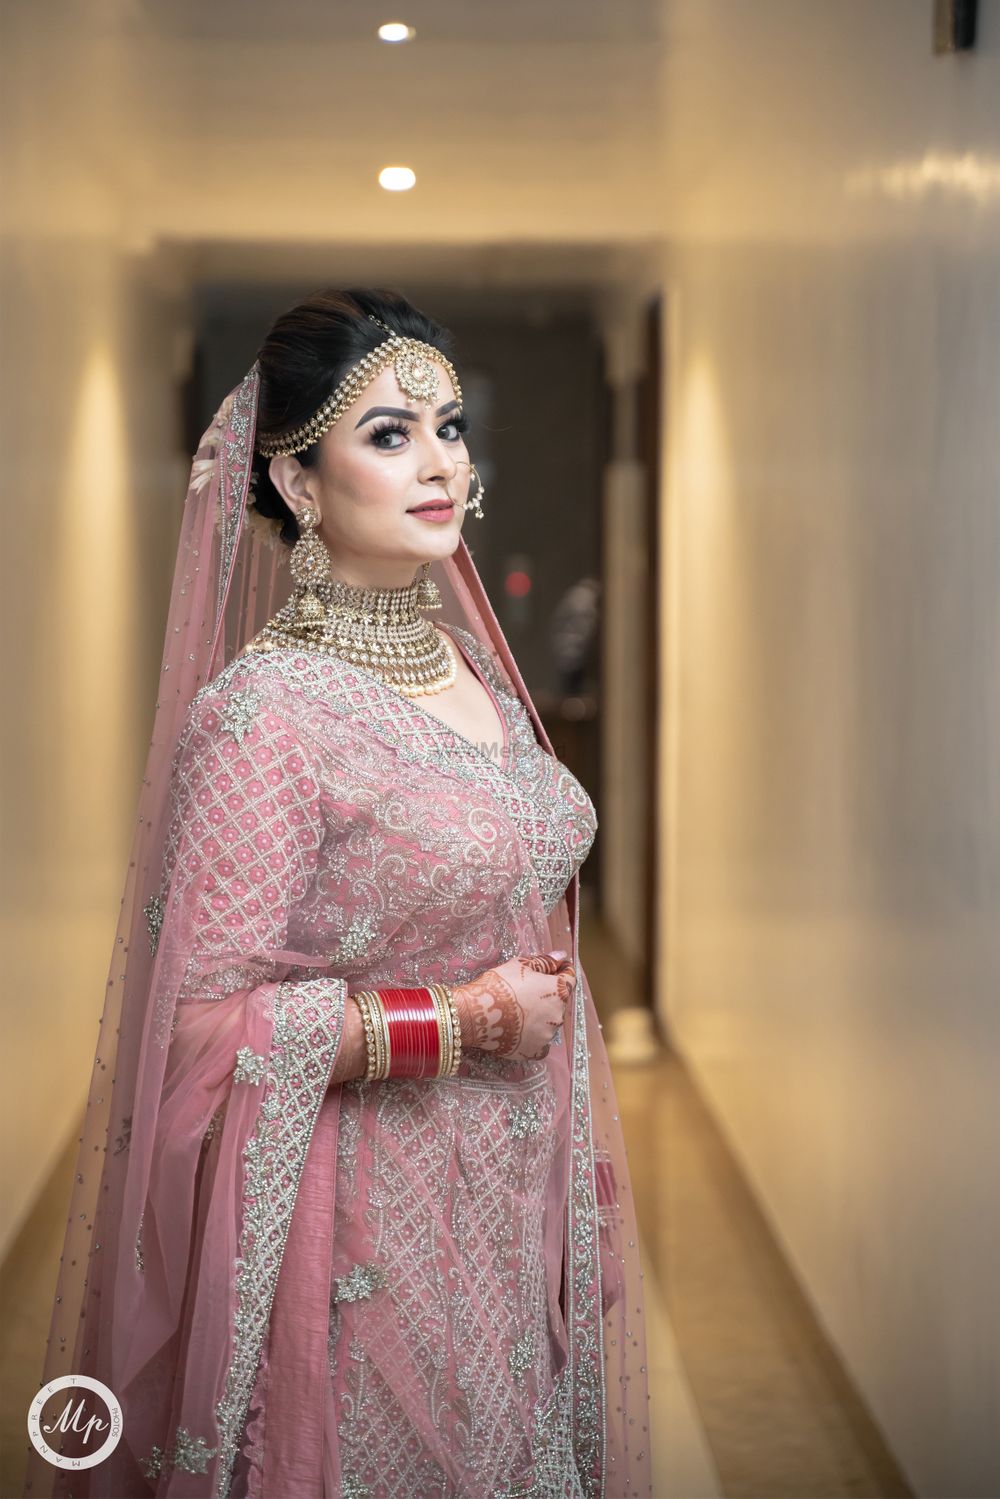 Photo From Brides only - By Manpreet Photos